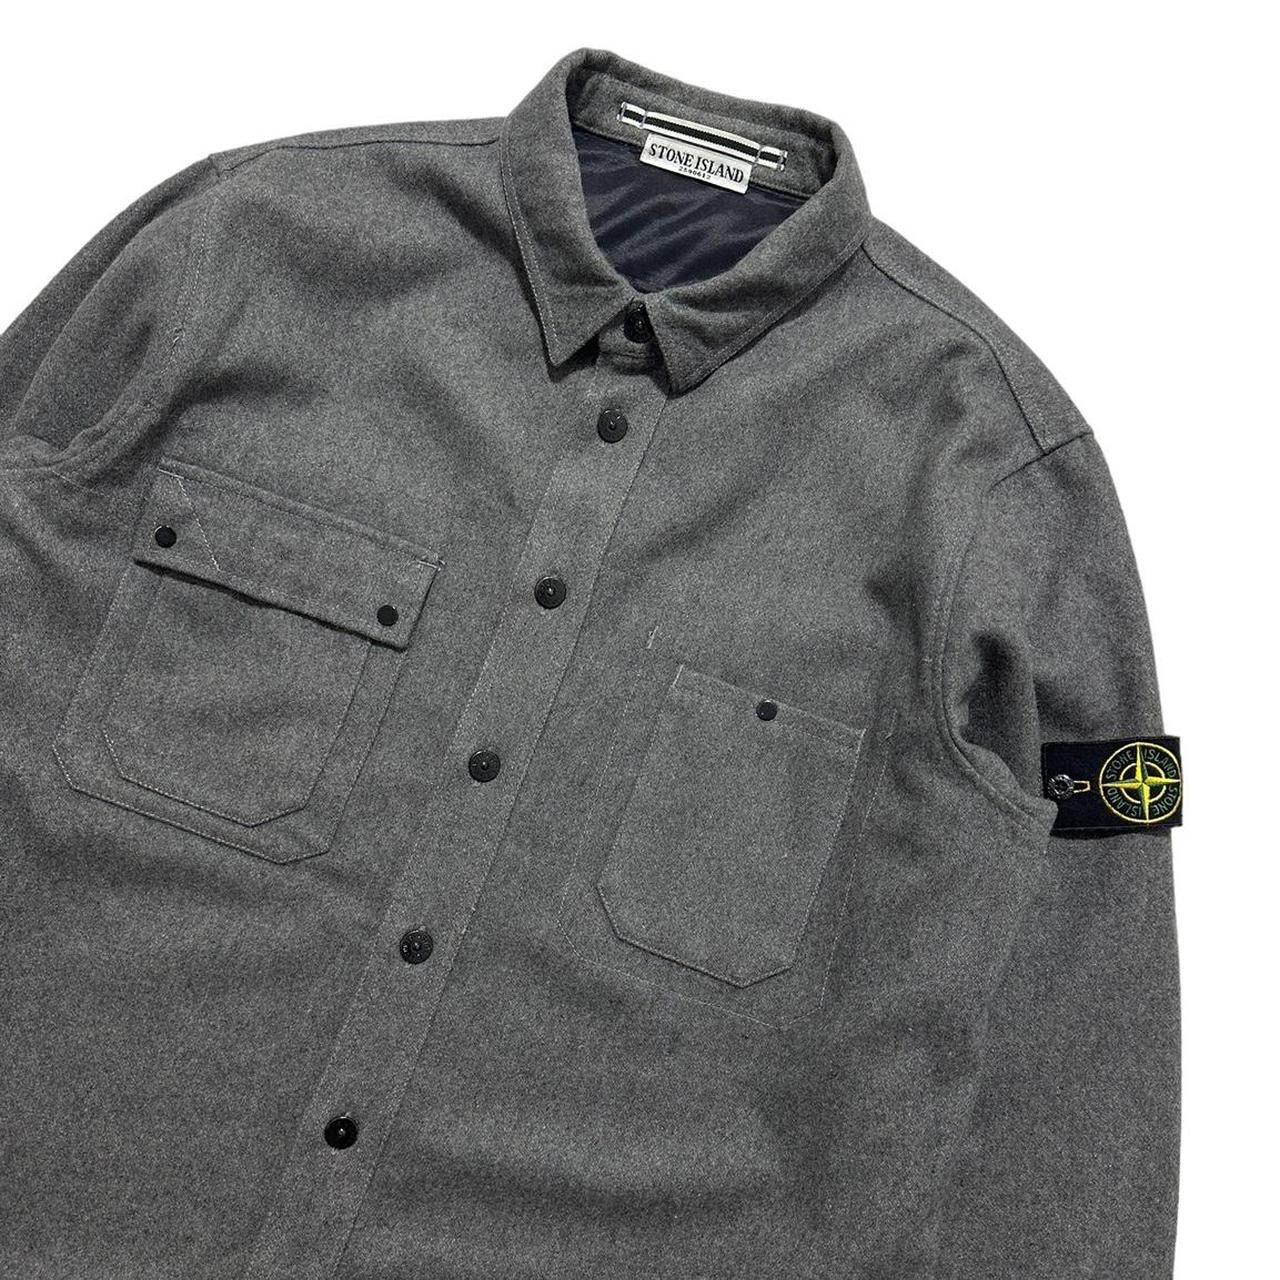 Stone Island Wool Double Pocket Overshirt - Known Source